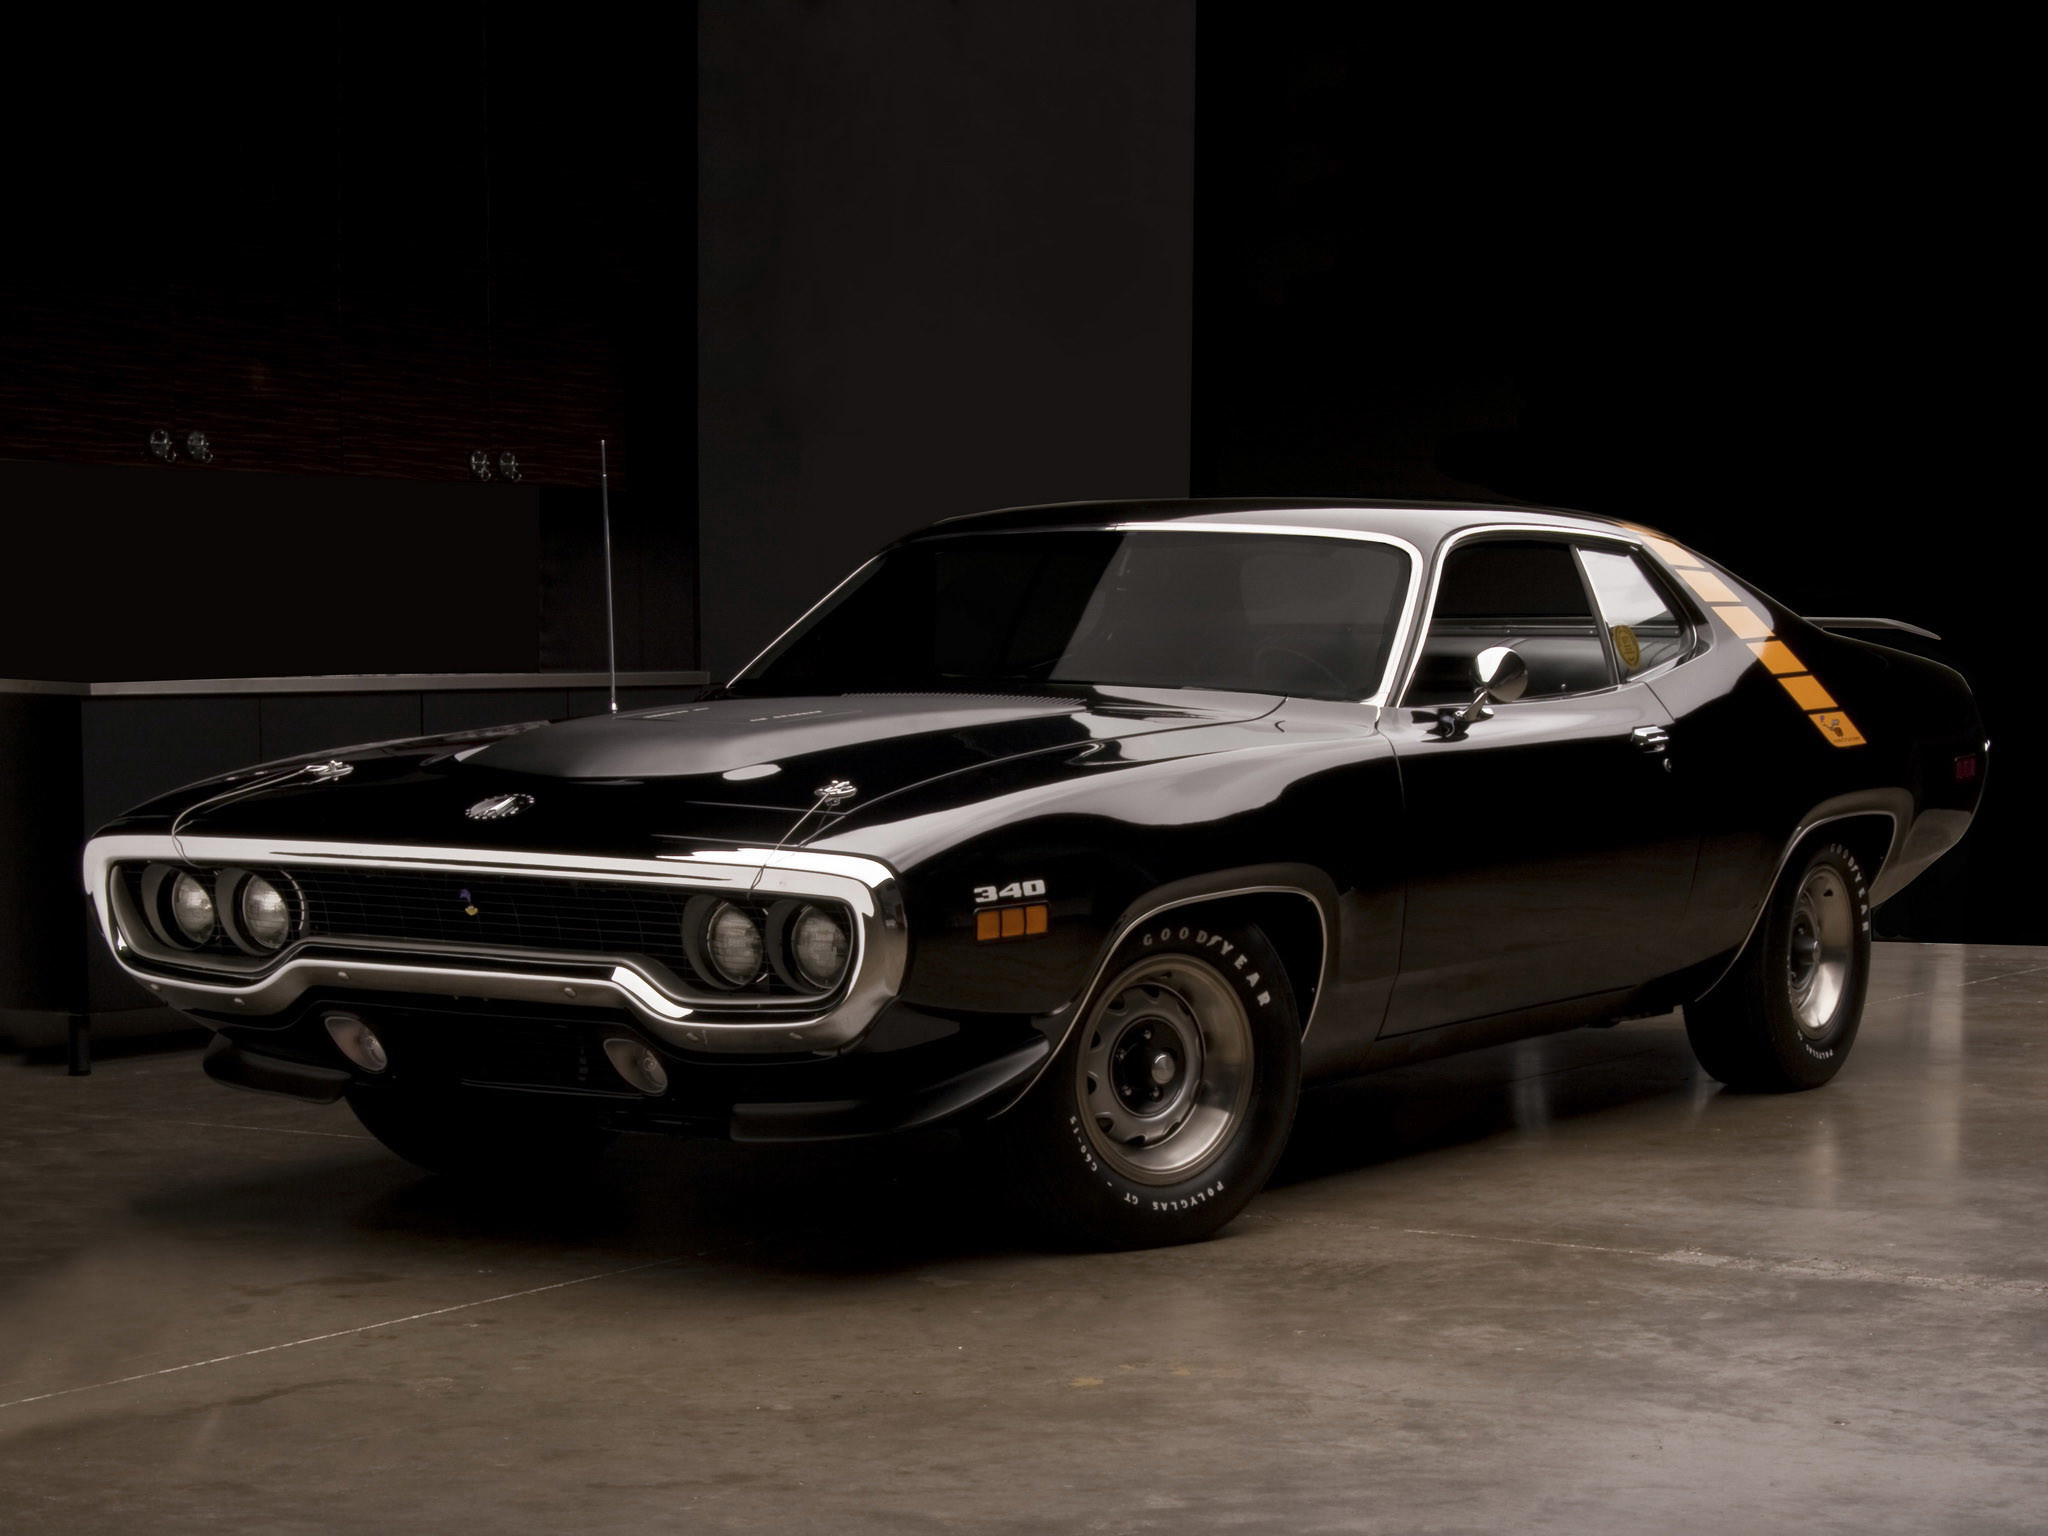 1971 Plymouth Road Runner 340 muscle classic wallpaper 107790 WallpaperUP